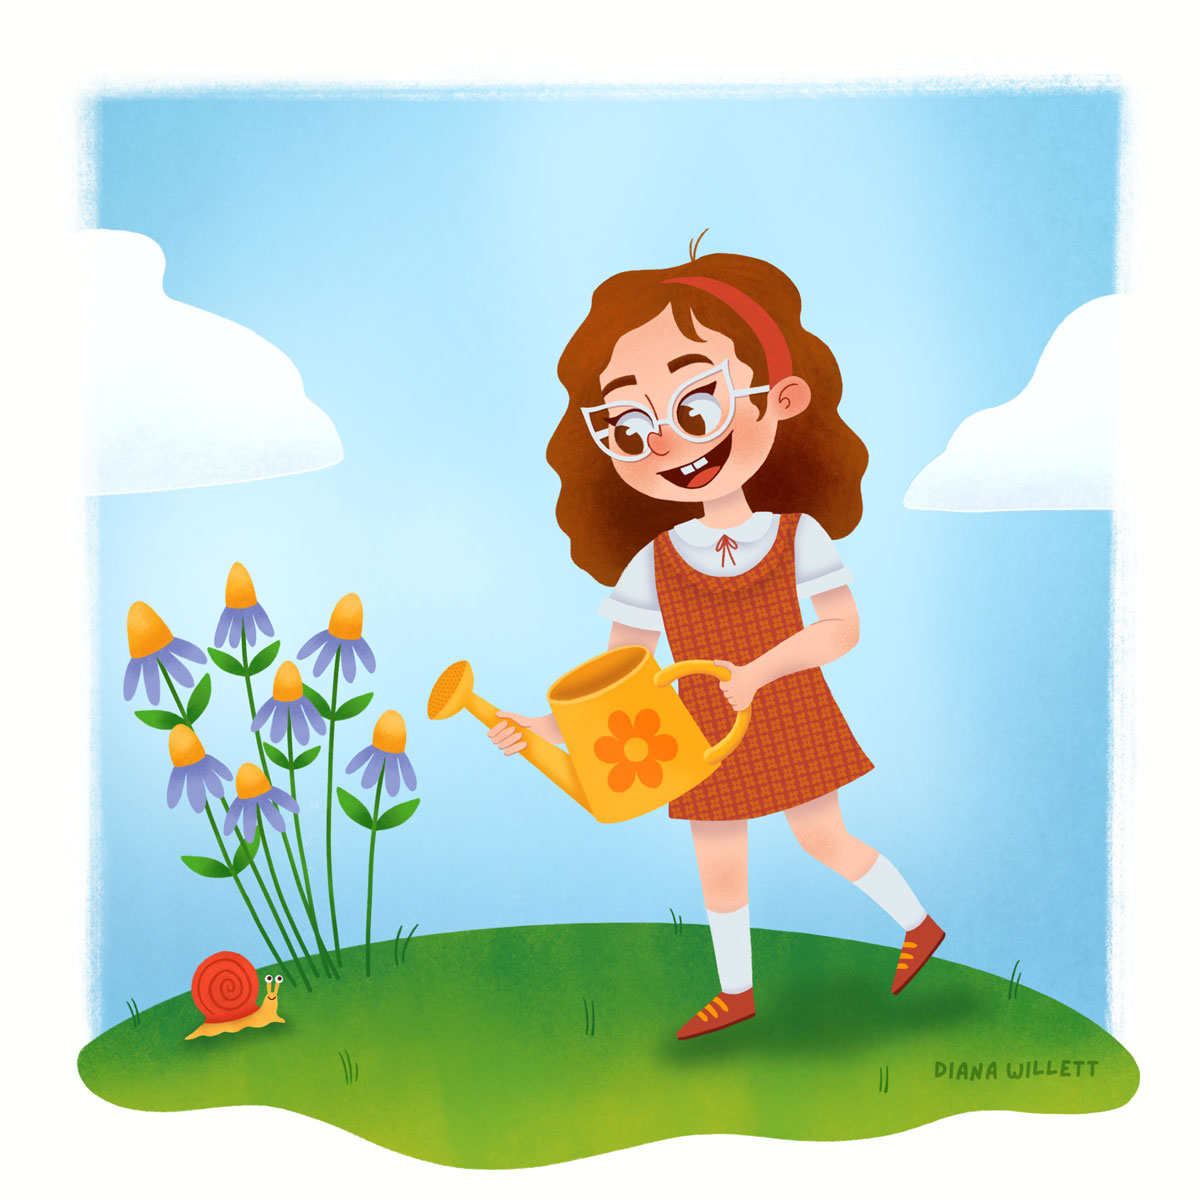 Kidlit Illustration by Diana Willett of a girl in glasses and red dress watering purple flowers a snail is there.